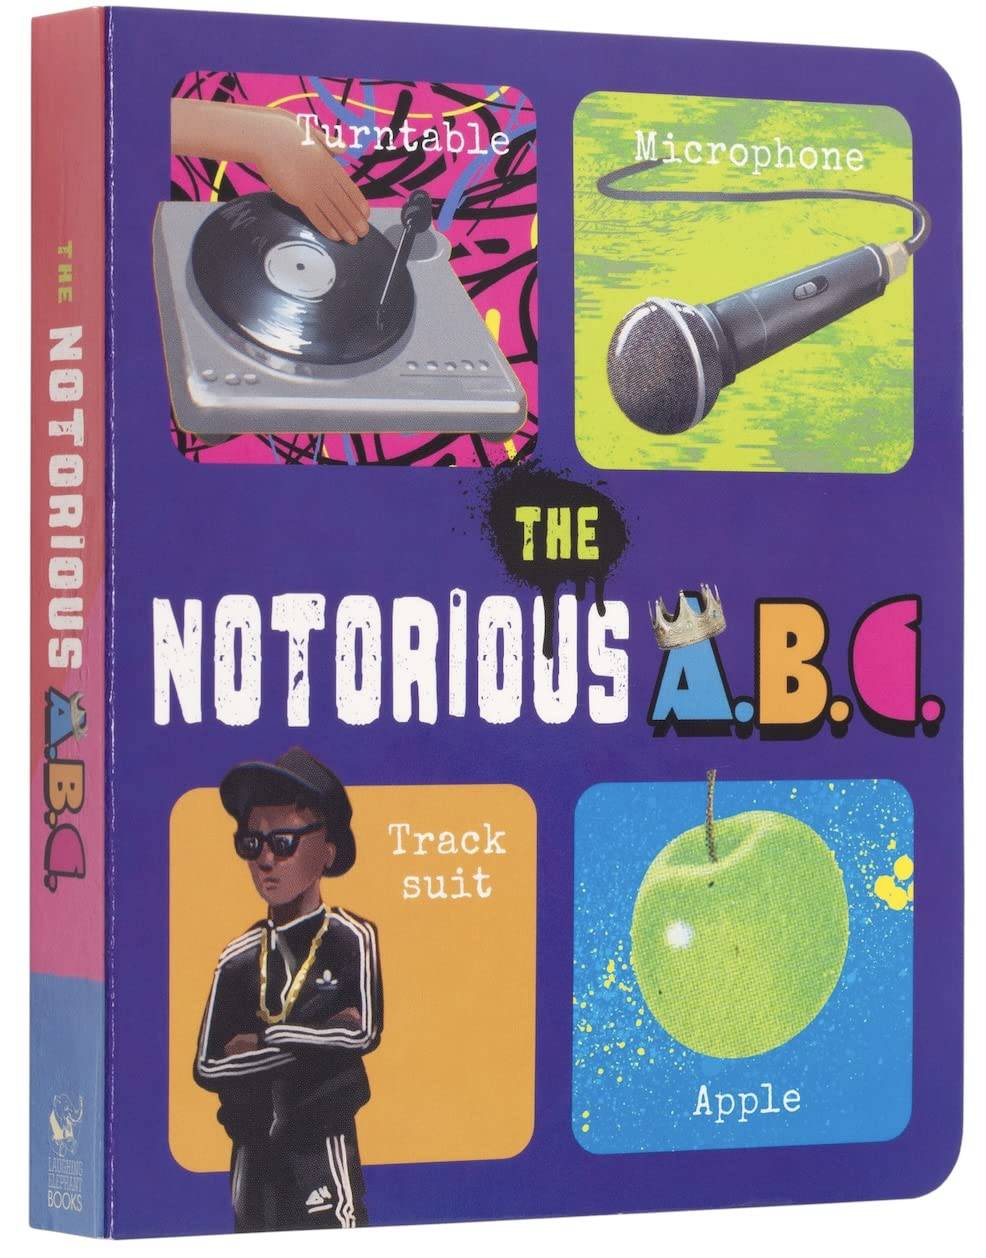 The Notorious A.B.C. Book - Twinkle Twinkle Little One